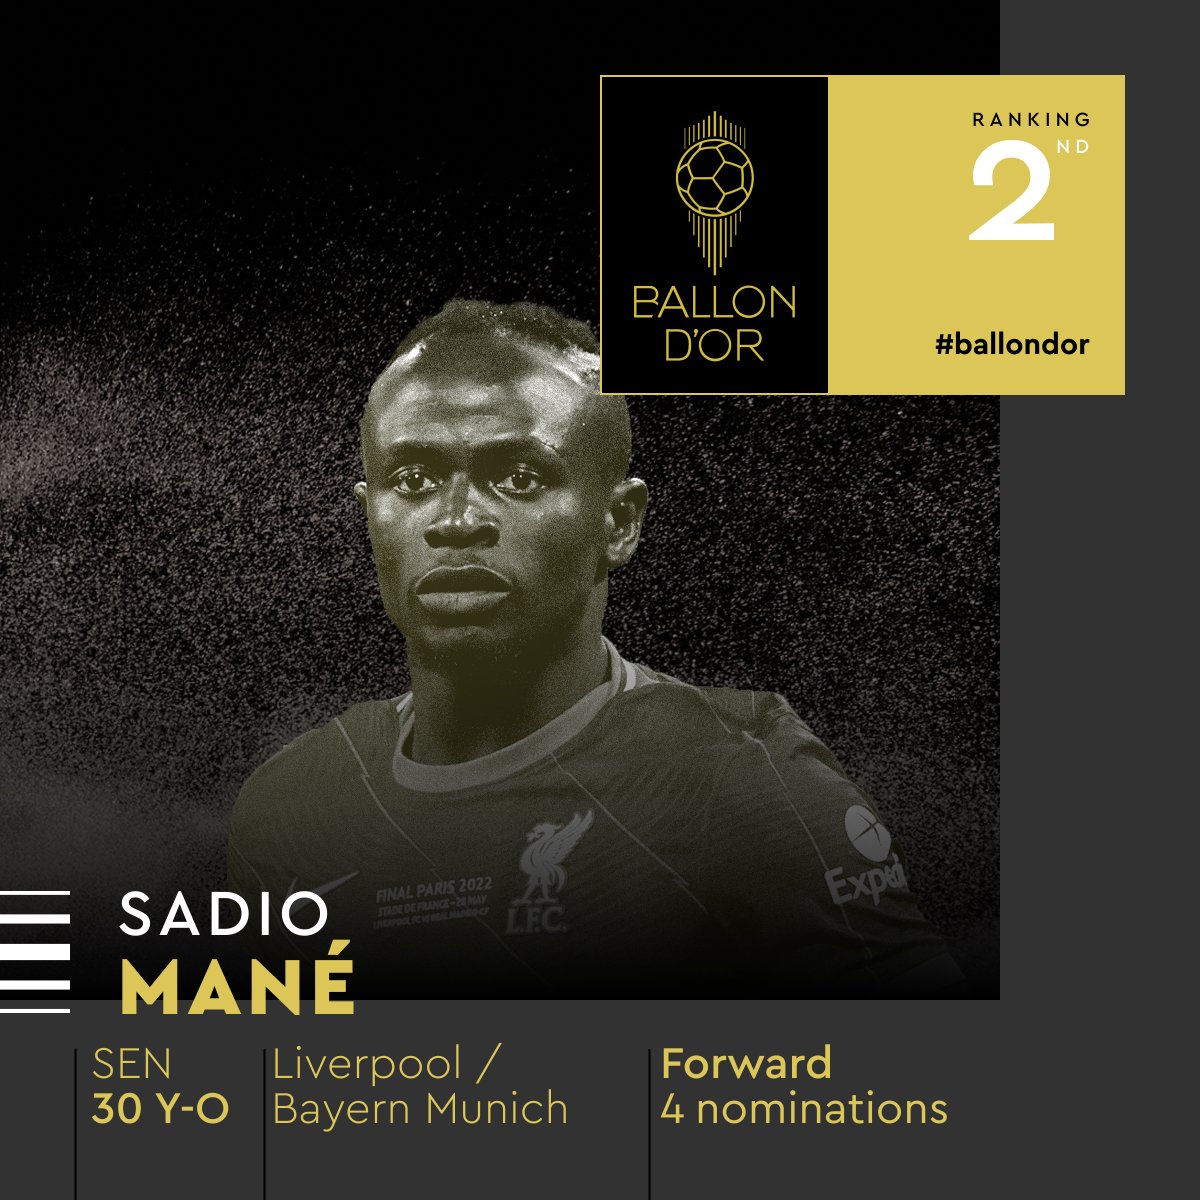 Ranked at the 2nd place for the 2022 Ballon d’Or Sadio Mané @FCBayern #ballondor